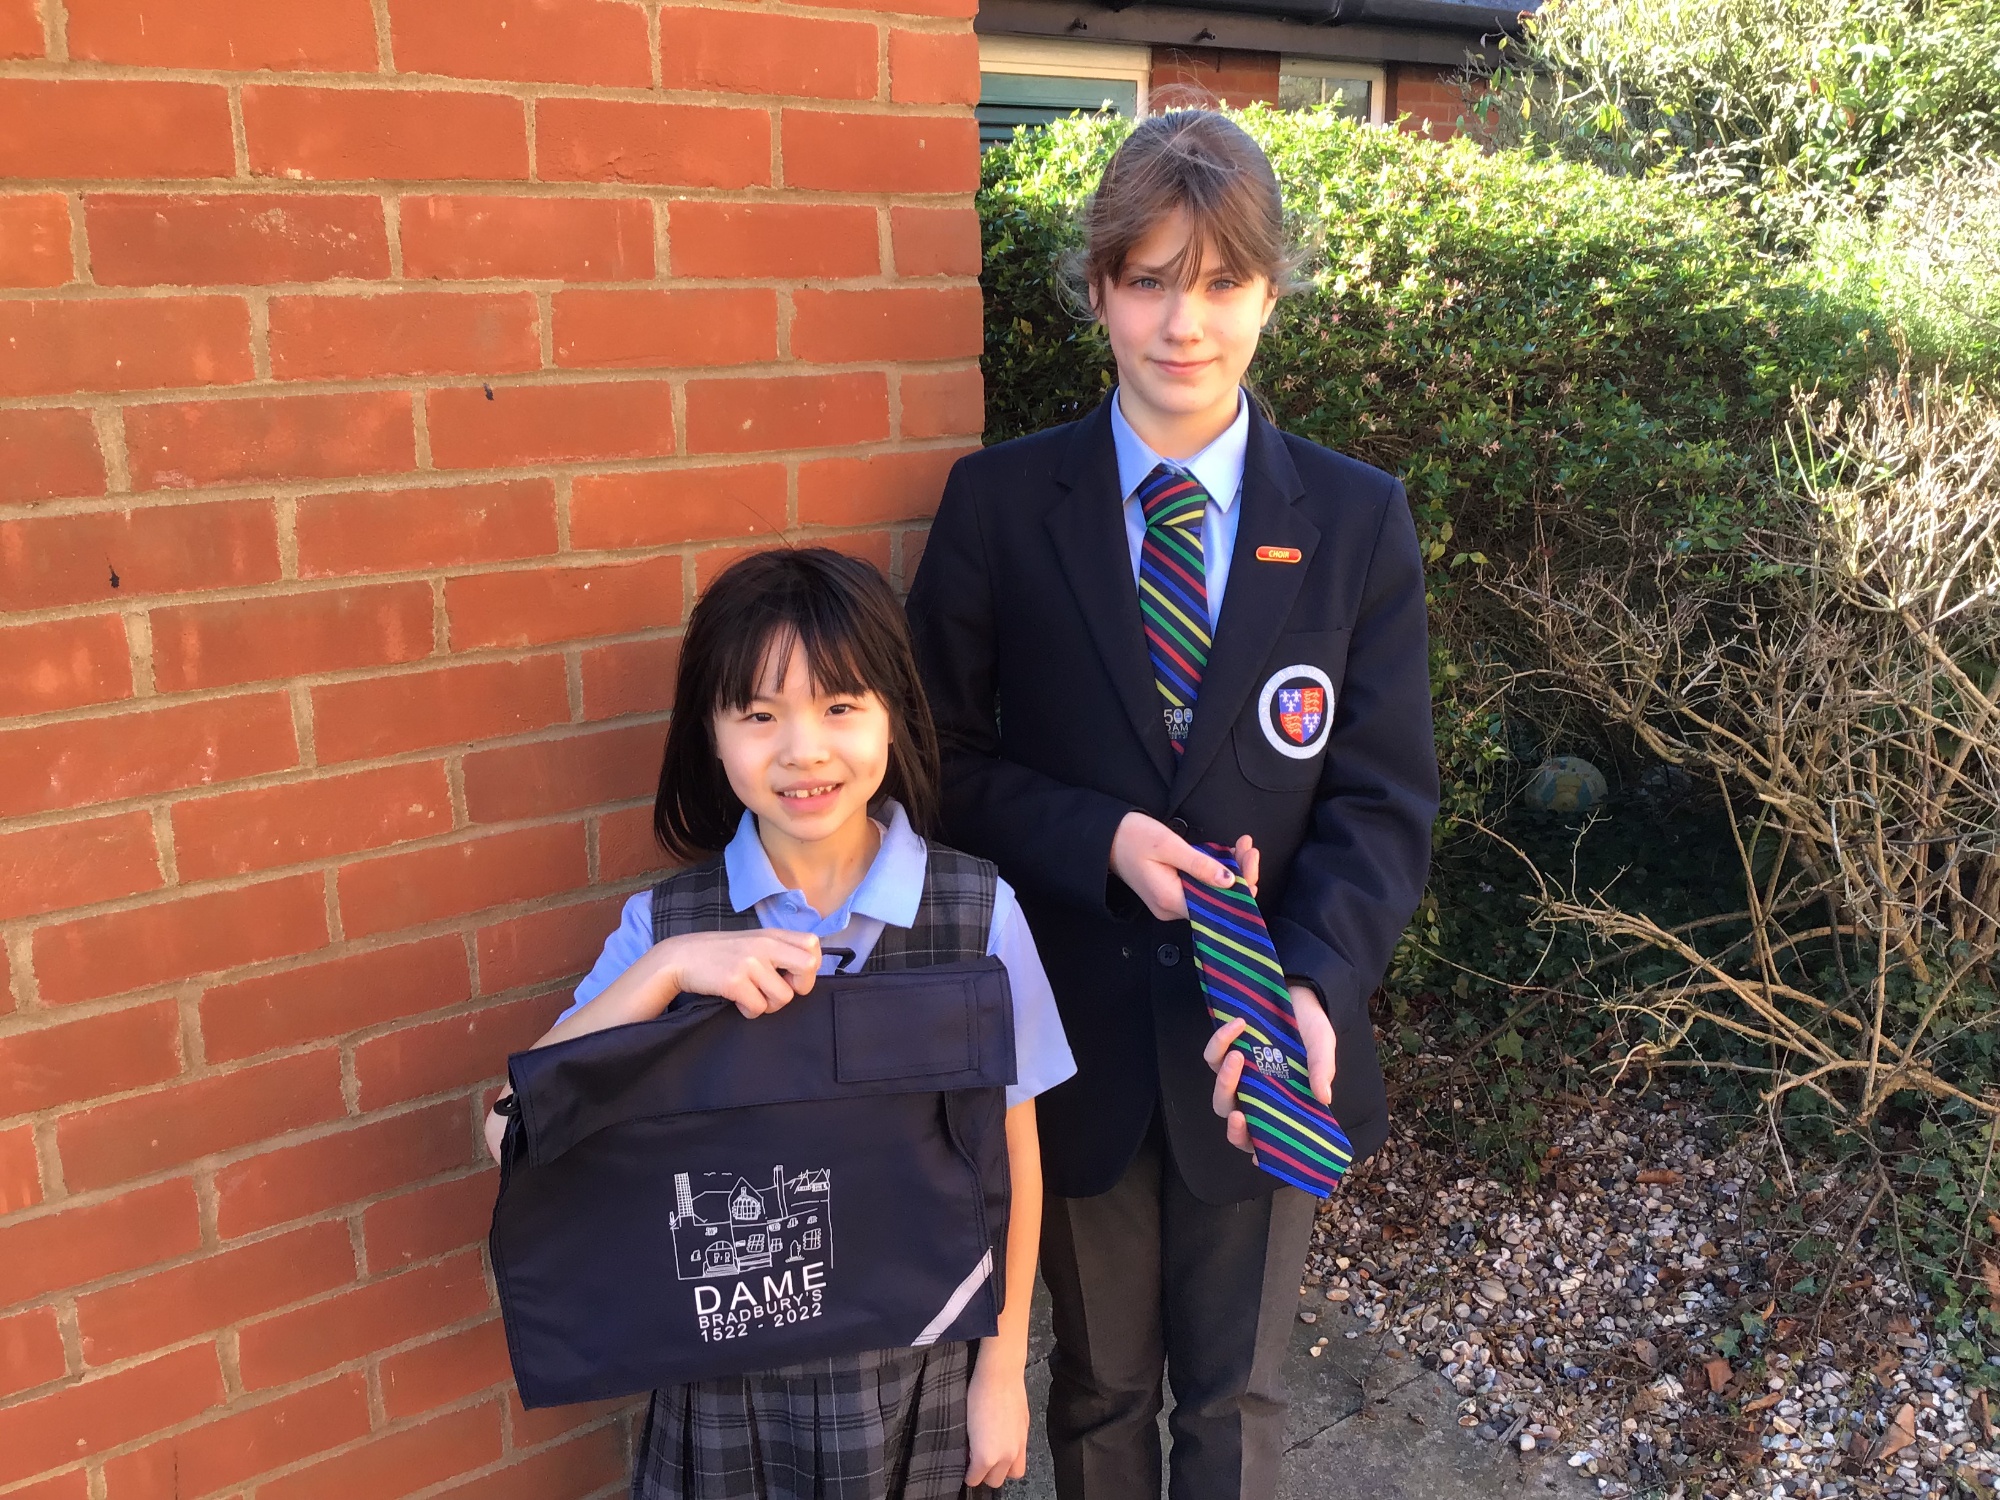 Dame Bradbury's winners of the bag and tie design competition